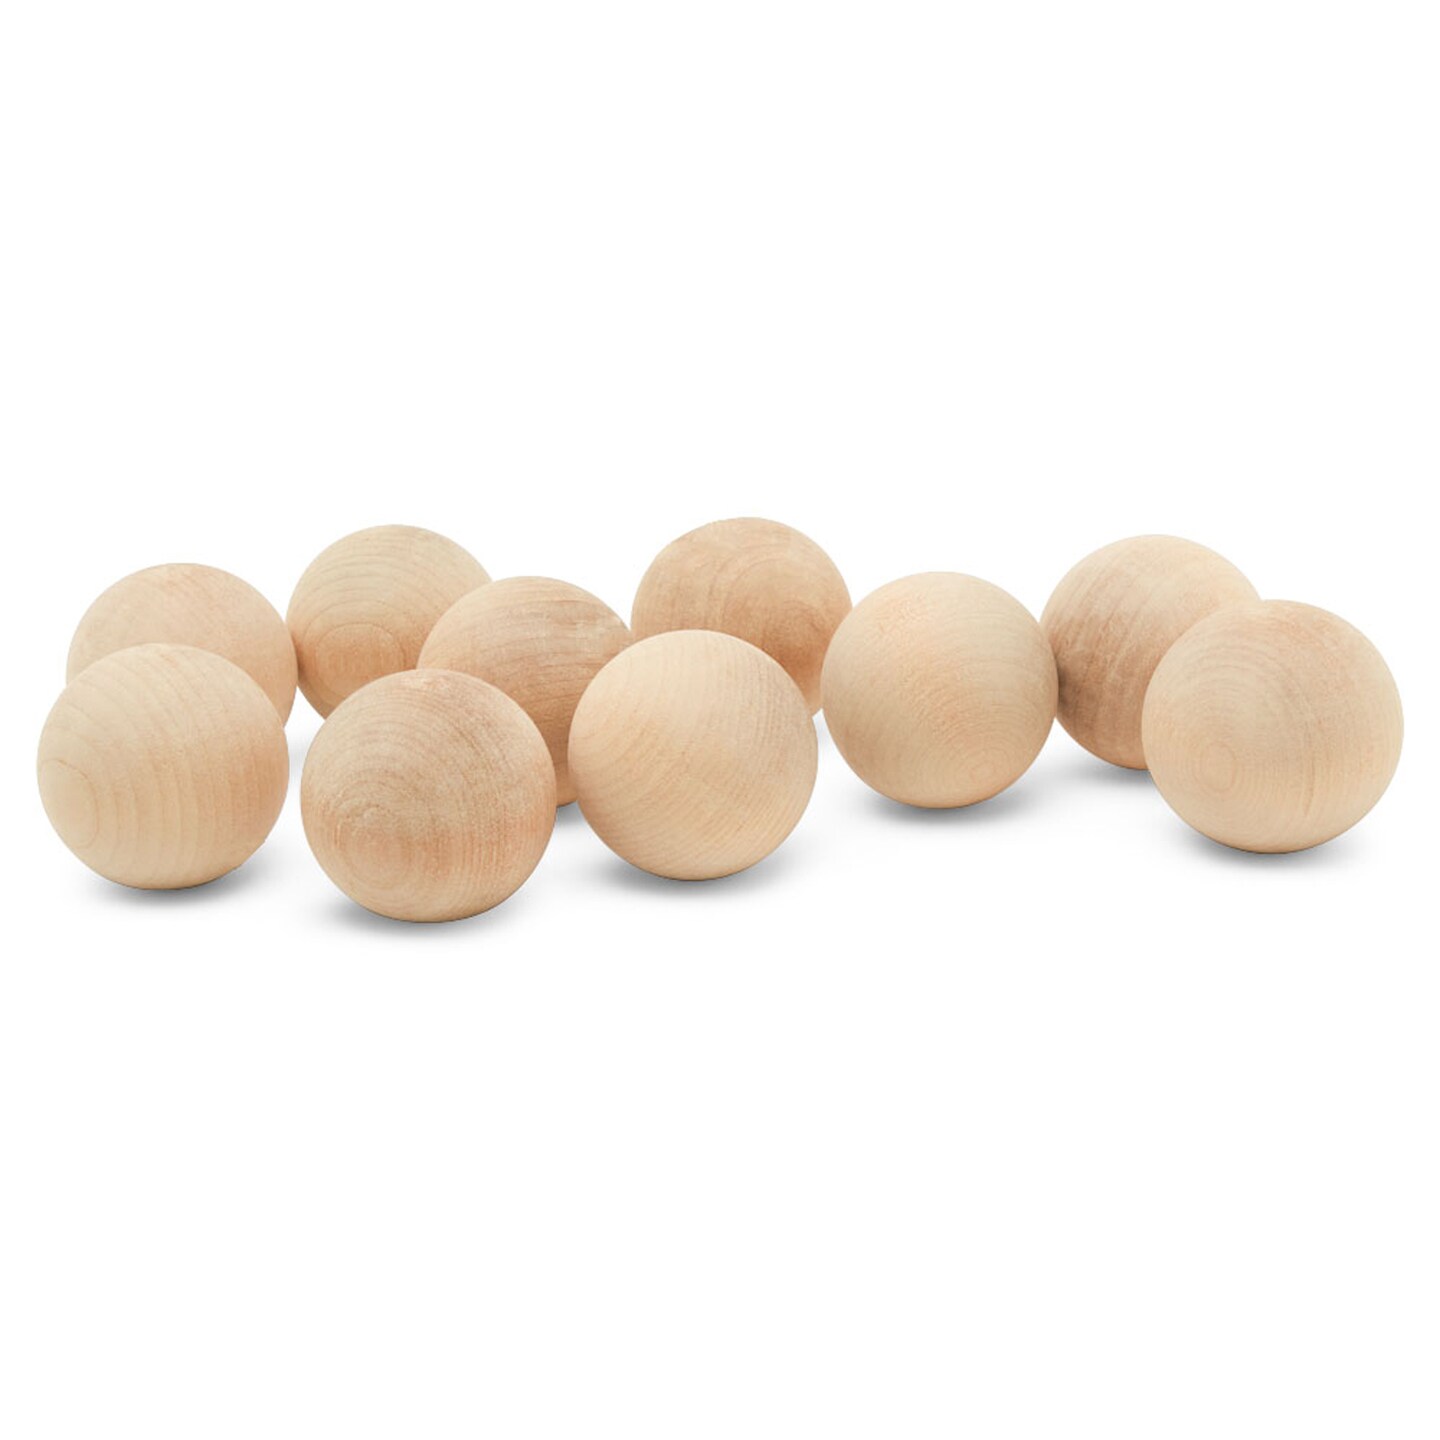 1-1/4 Inch Small Wood Balls, Pack of 10 Wooden Balls for Crafts and DIY  Project, Hardwood Birch Wood Balls, by Woodpeckers